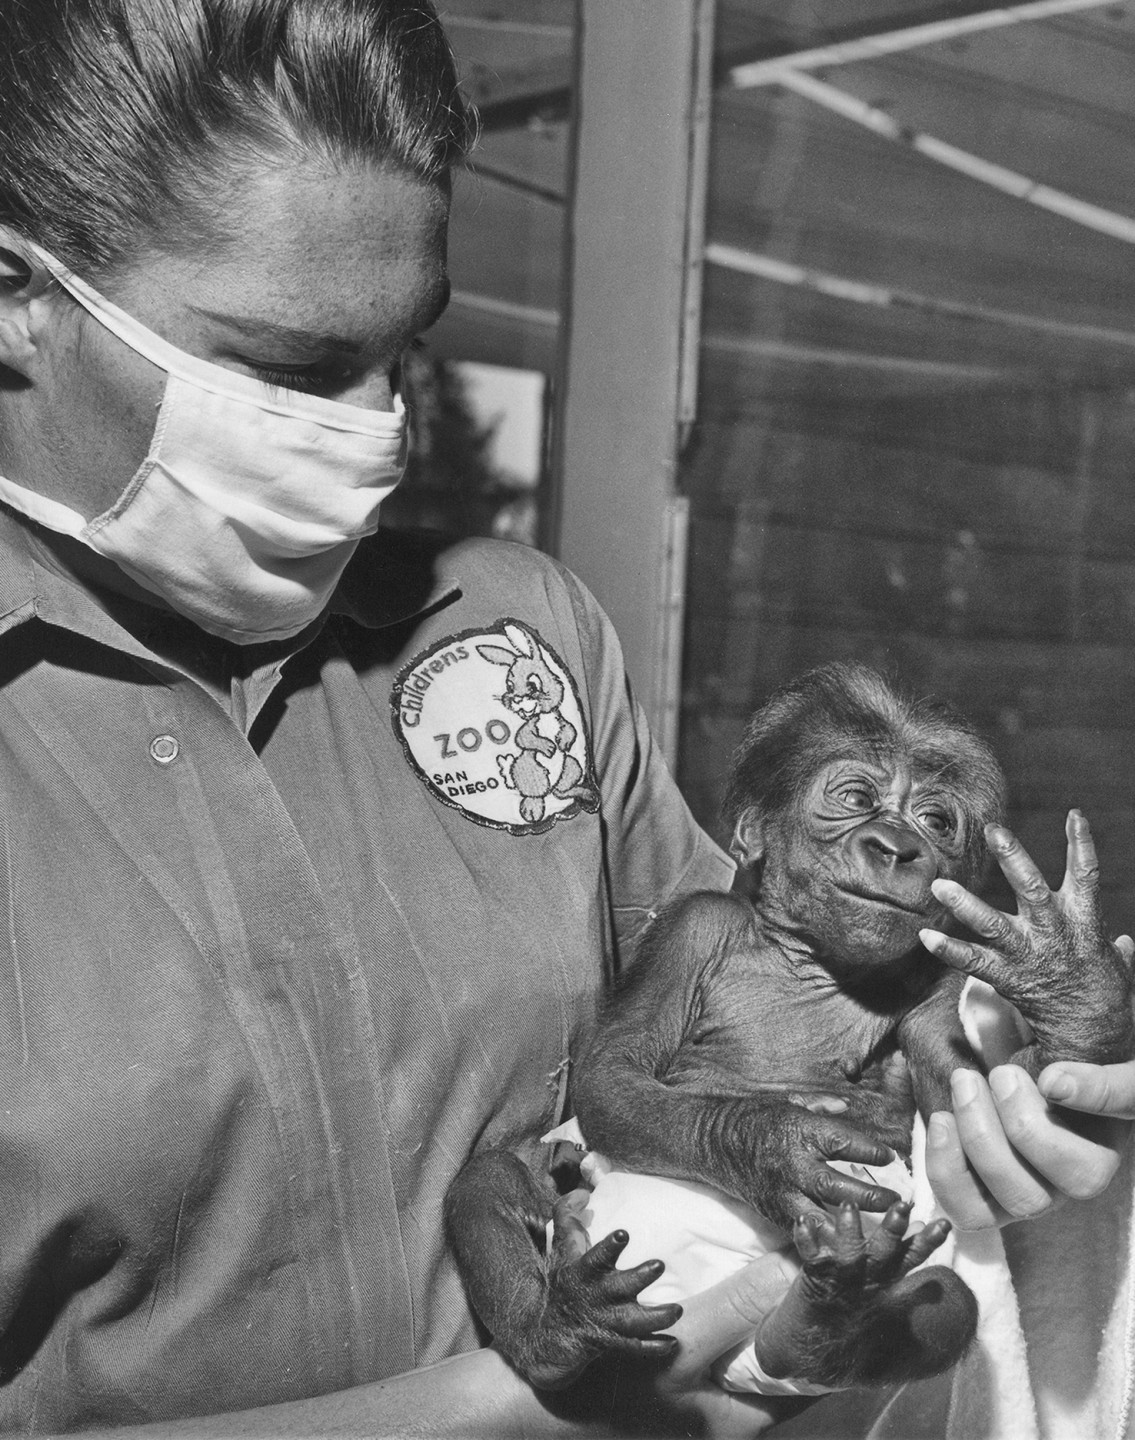 After Alvila's birth, Vila tried to care for her baby, but she couldn’t get the hang of how to nurse her properly. So Alvila was brought to the Children’s Zoo nursery to be hand raised. Visitors flocked to see the baby ape as she grew. Alvila was an adorable handful, and she kept the Children's Zoo nursery attendants on their toes.